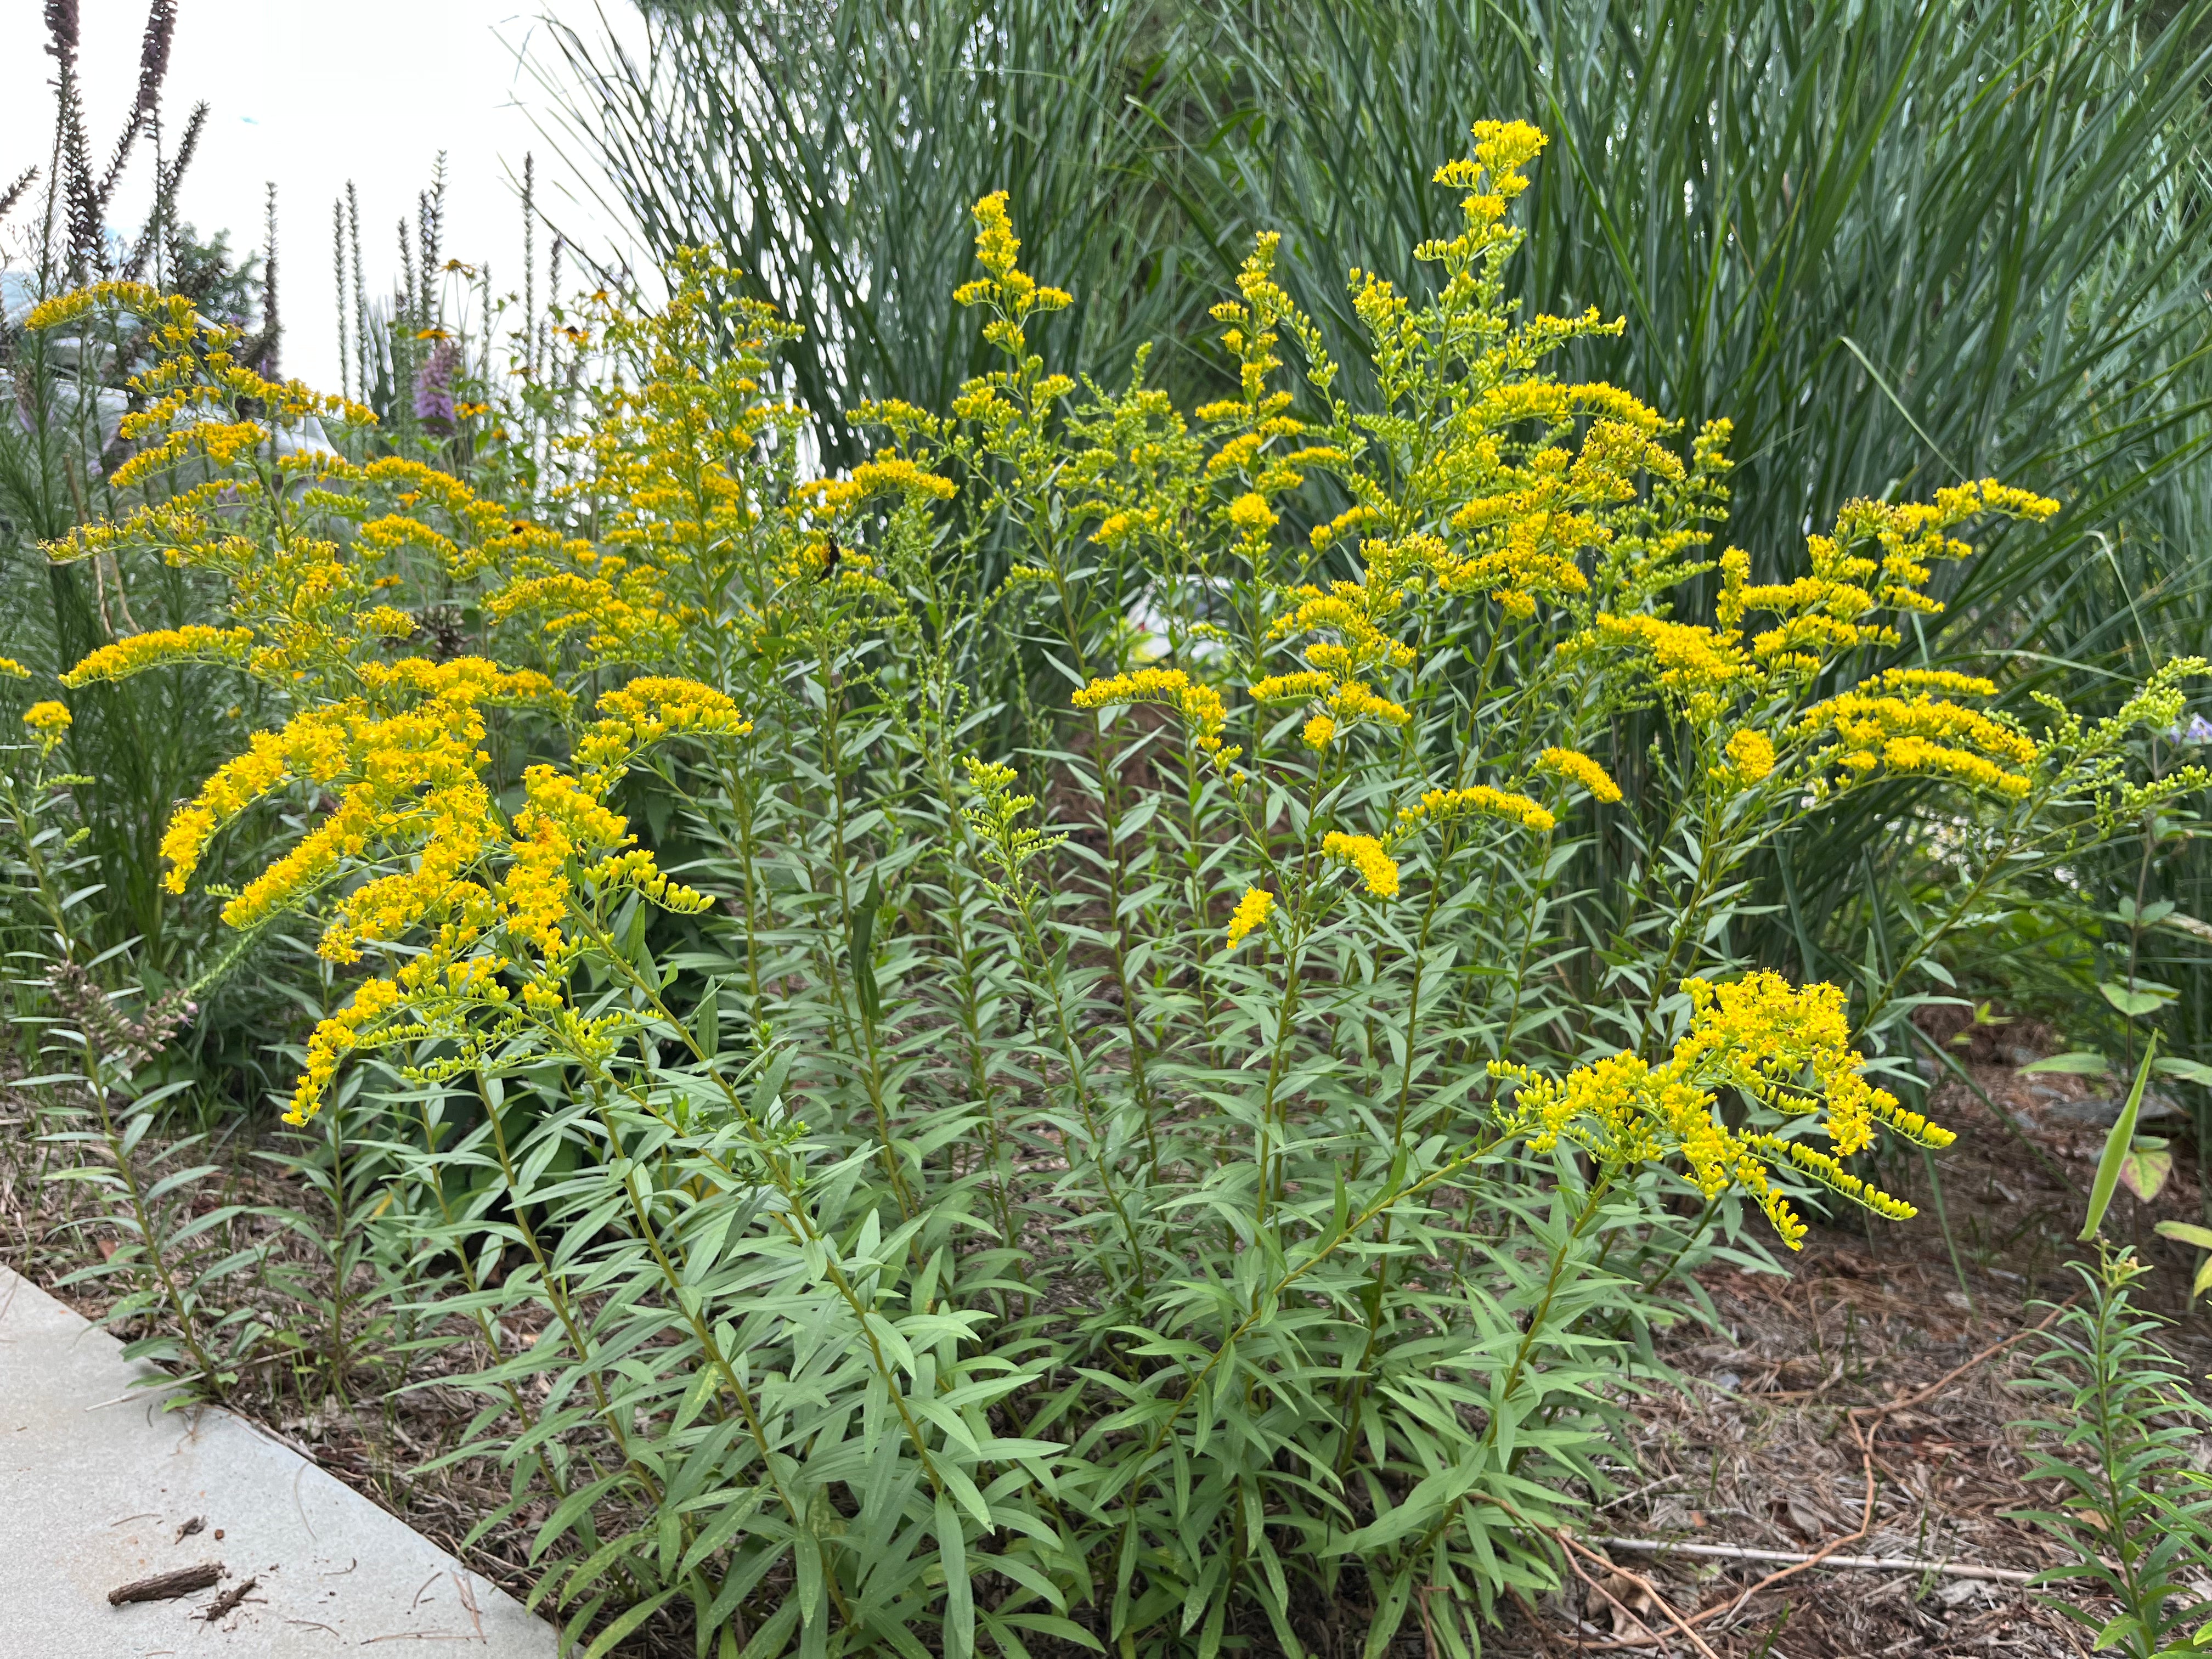 Solidago juncea / Early Goldenrod (Aster Family)